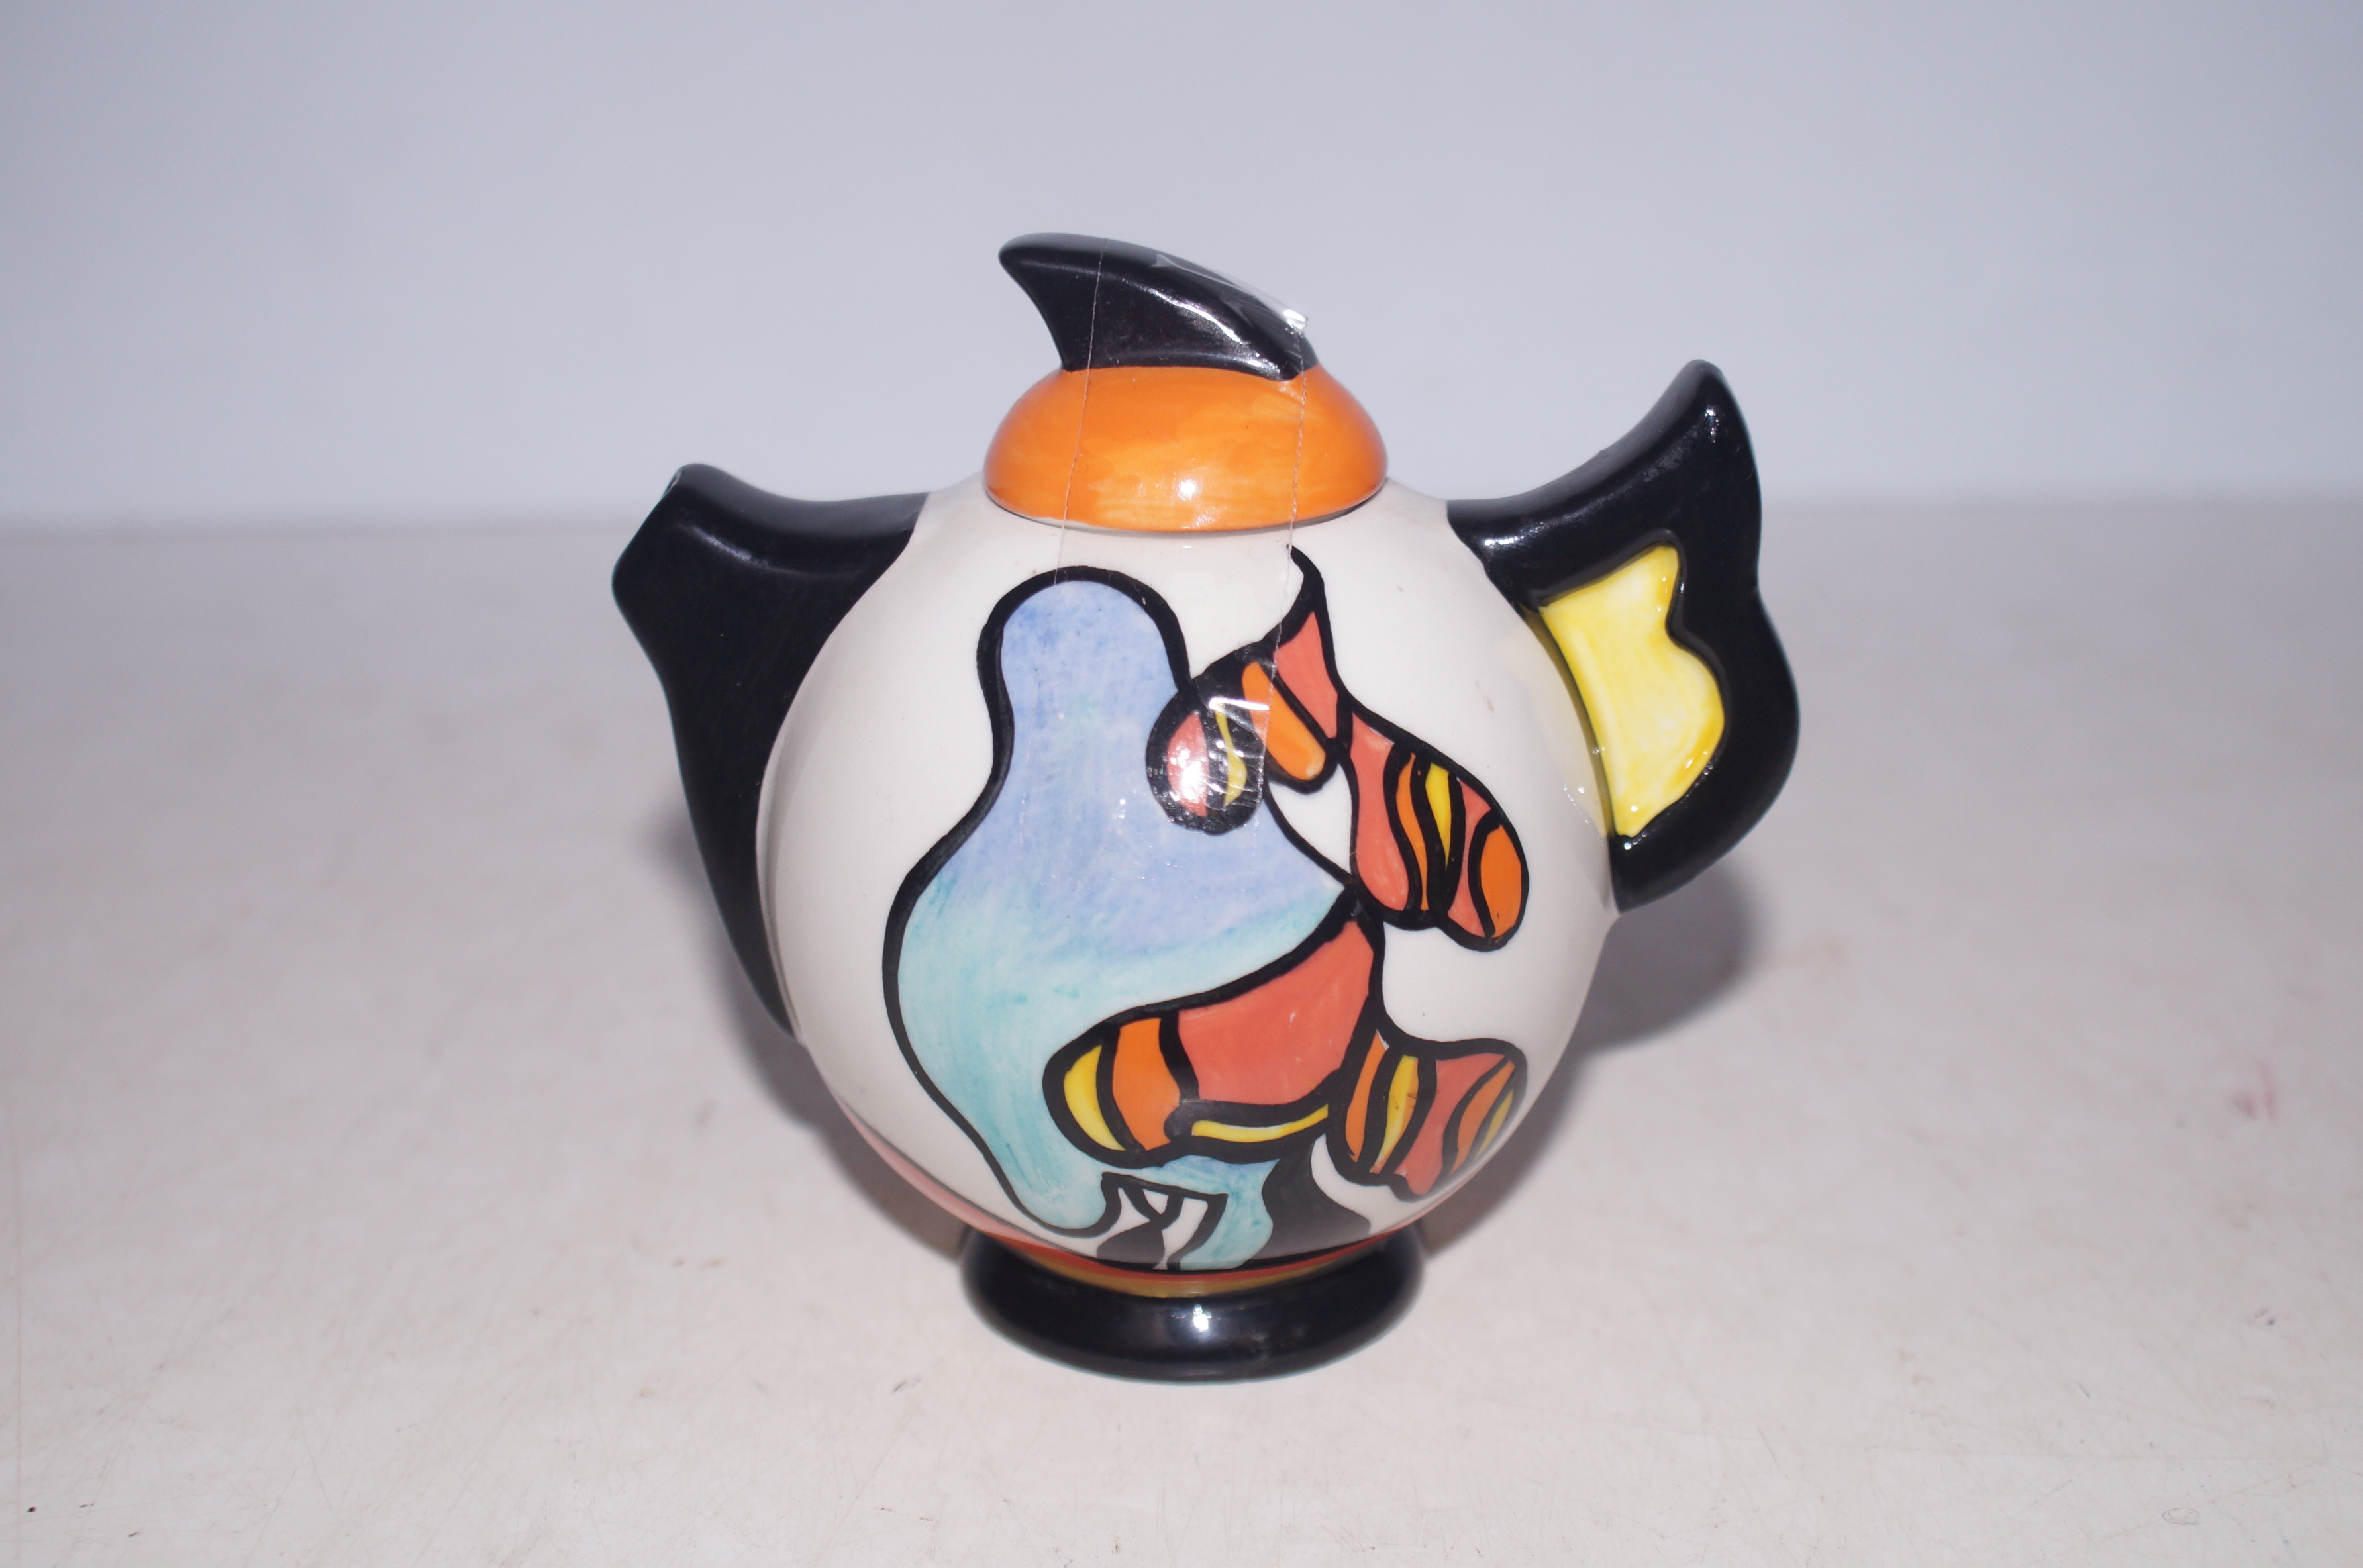 Lorna Bailey The beeches small teapot Height 11 cm